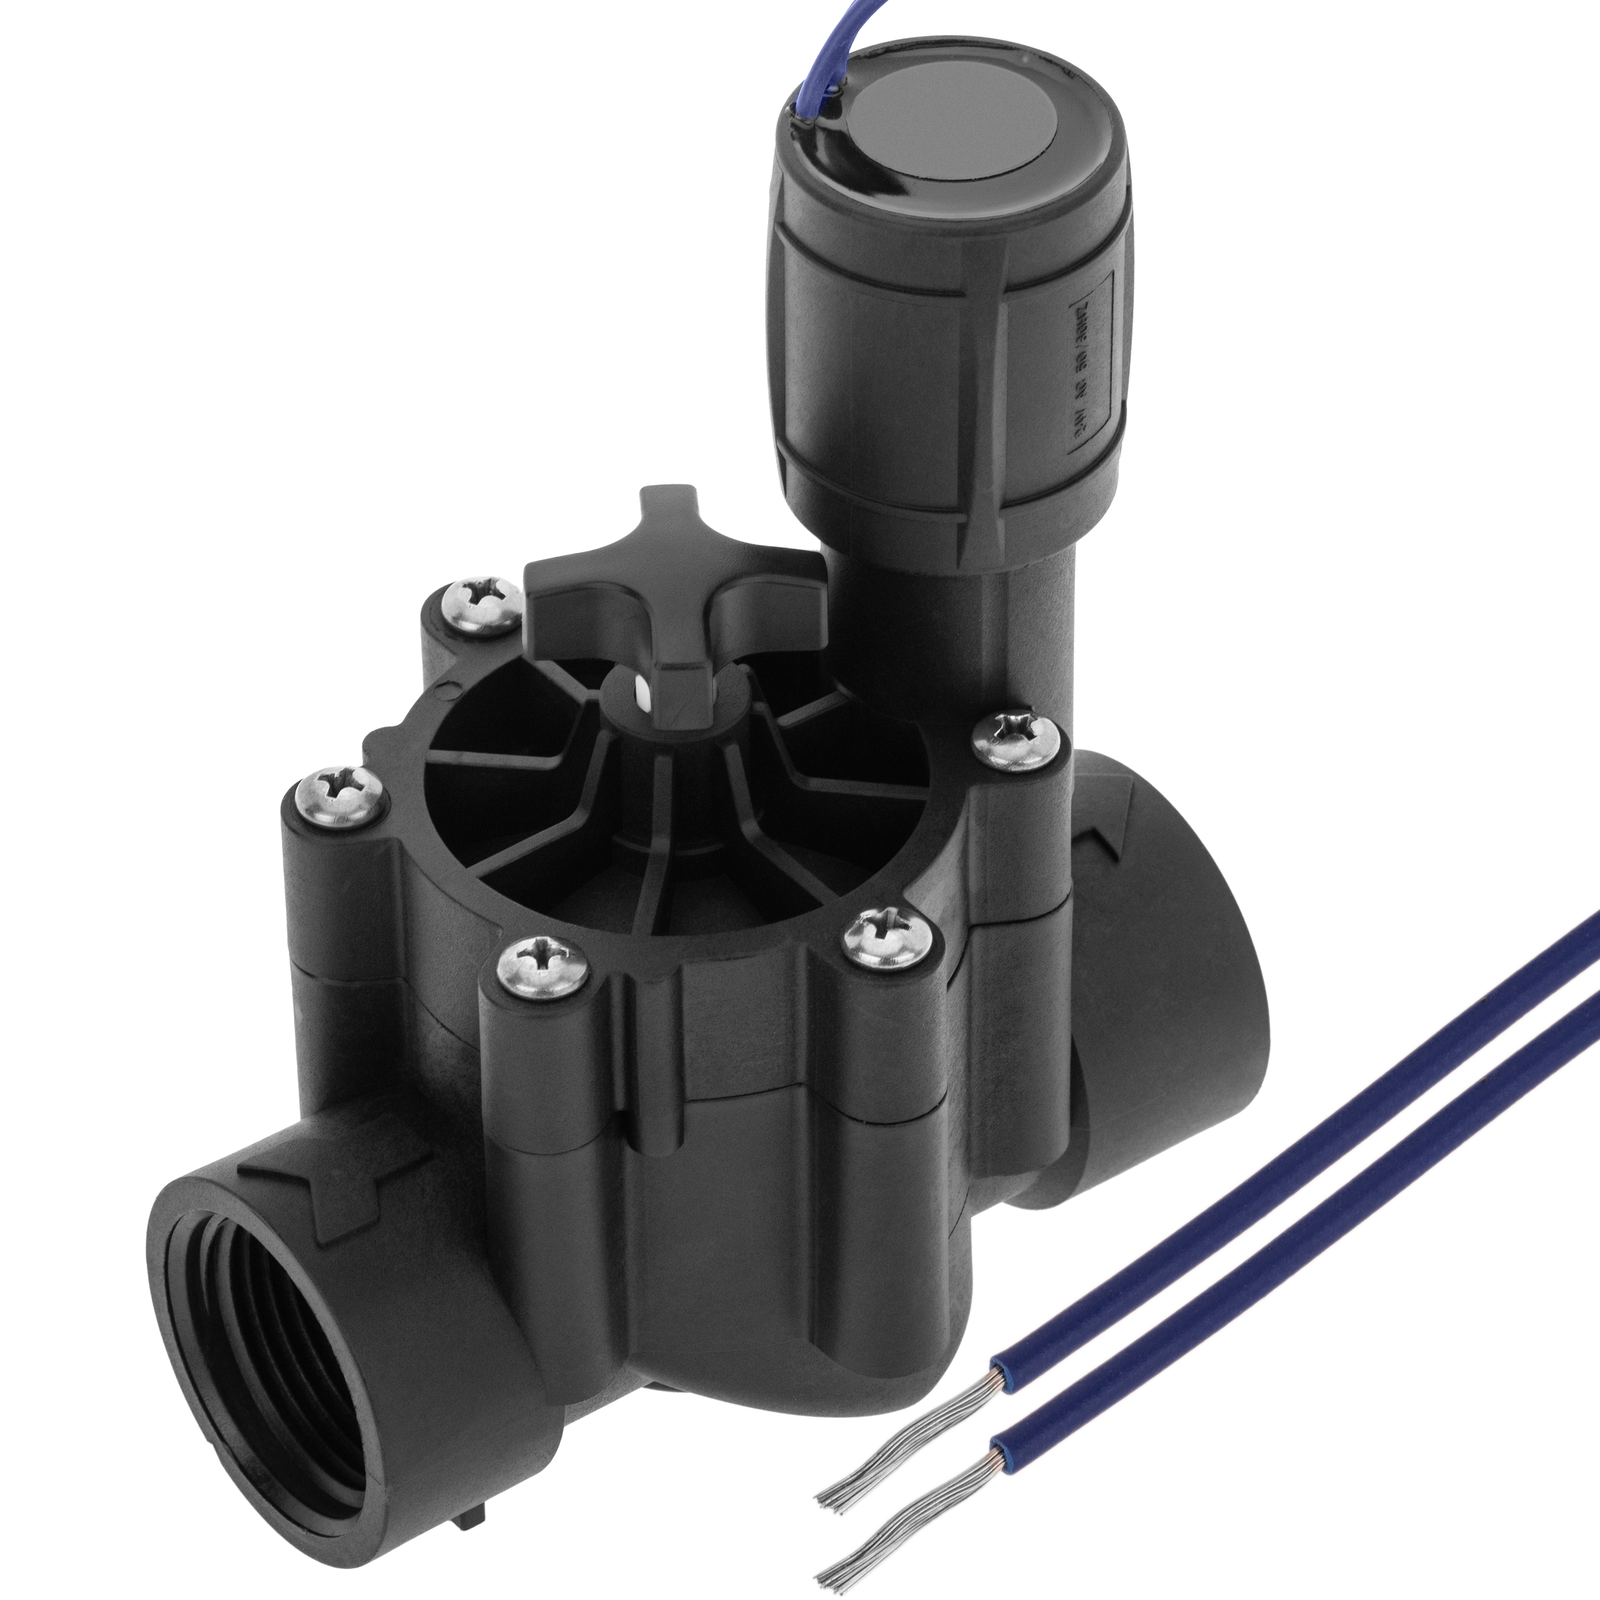 5m spiral mechanical plunger for drain pipes - Cablematic